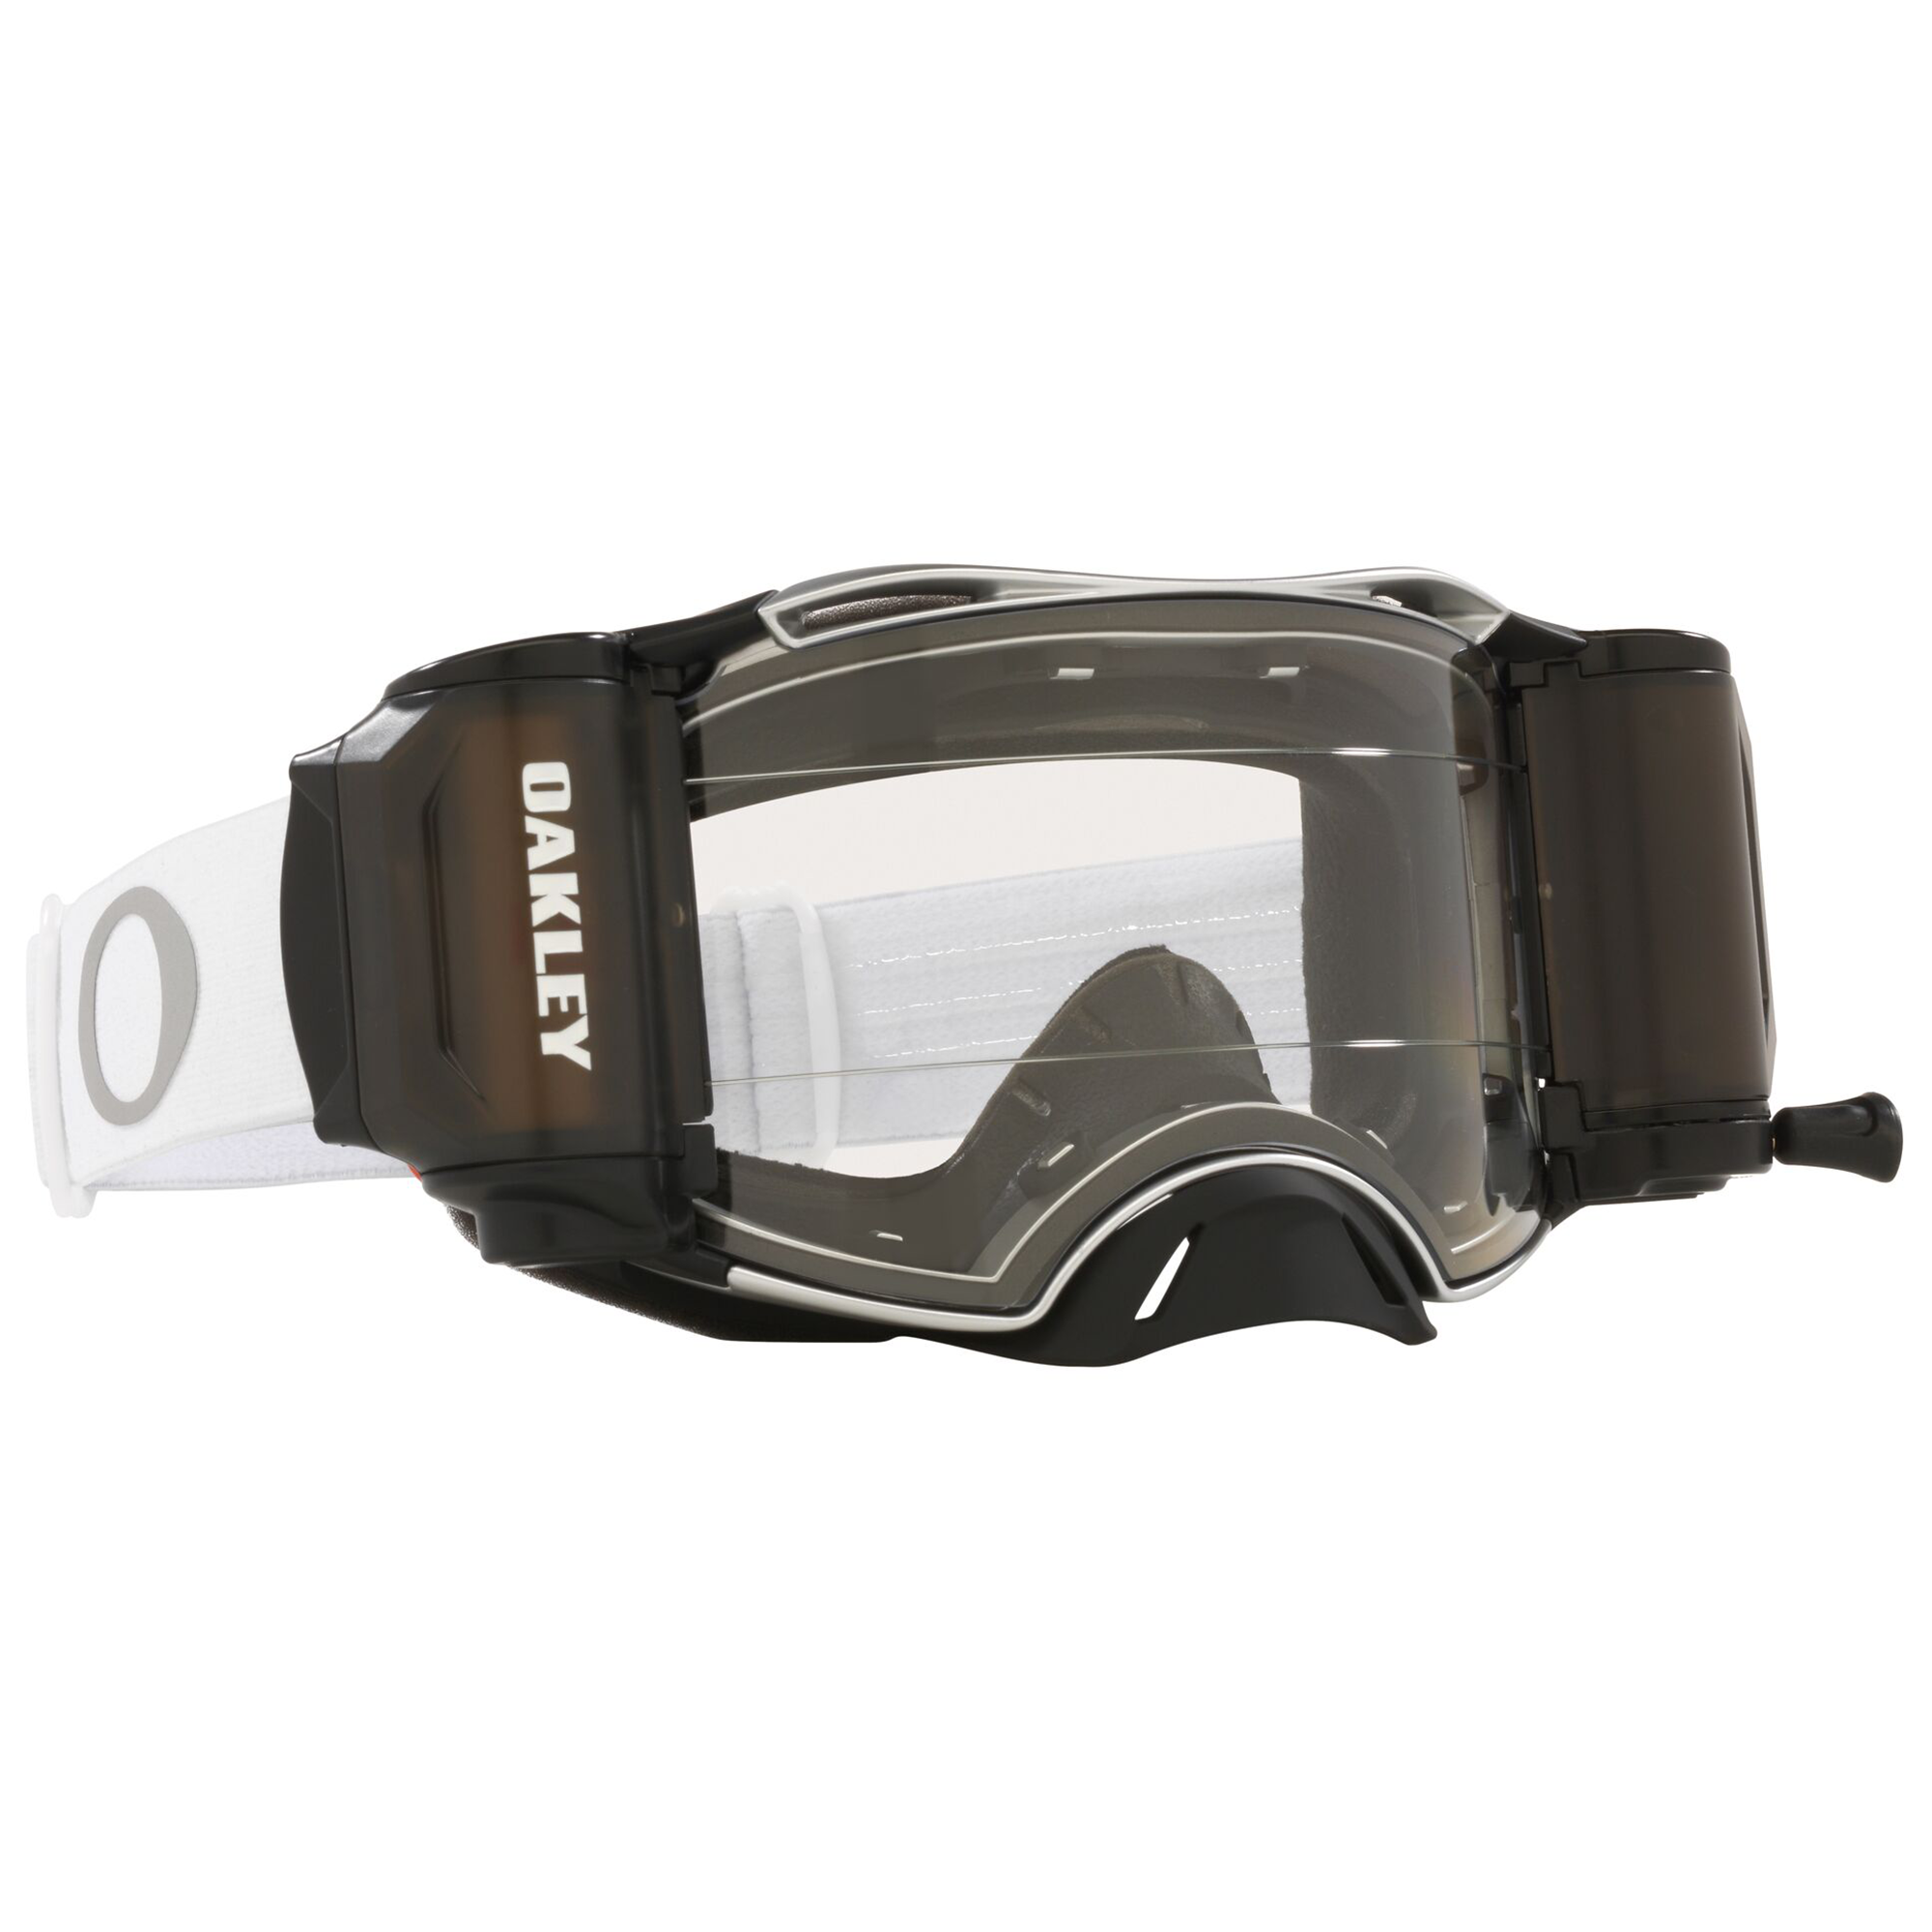 Oakley Airbrake MX Goggle in Tuff Blocks White with Clear Lens and Roll Offs included